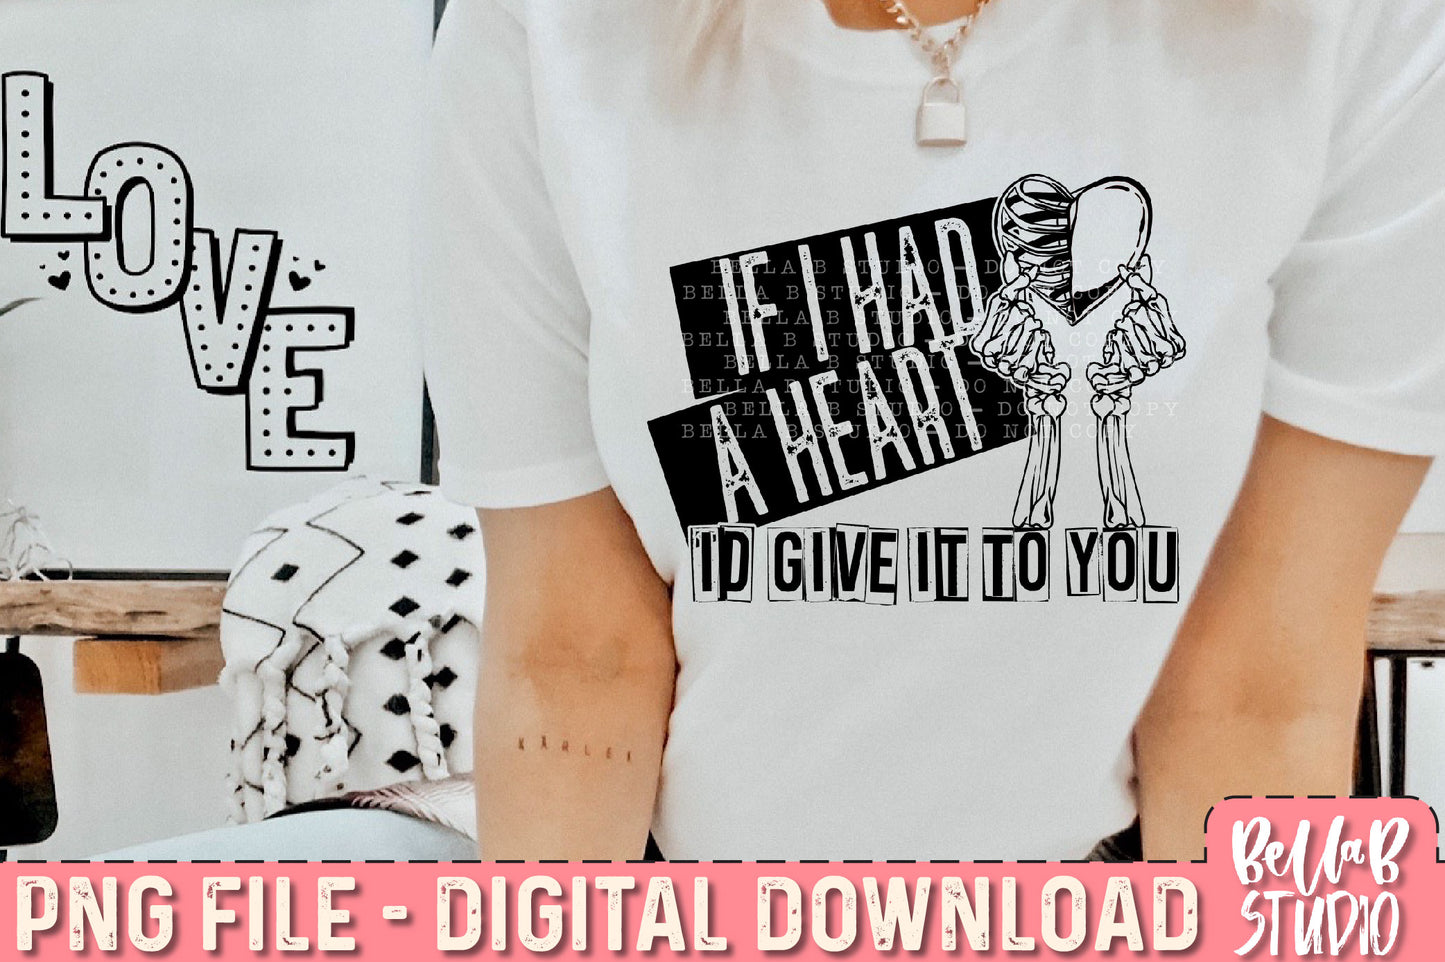 If I Had a Heart I'd Give It To You Sublimation Design